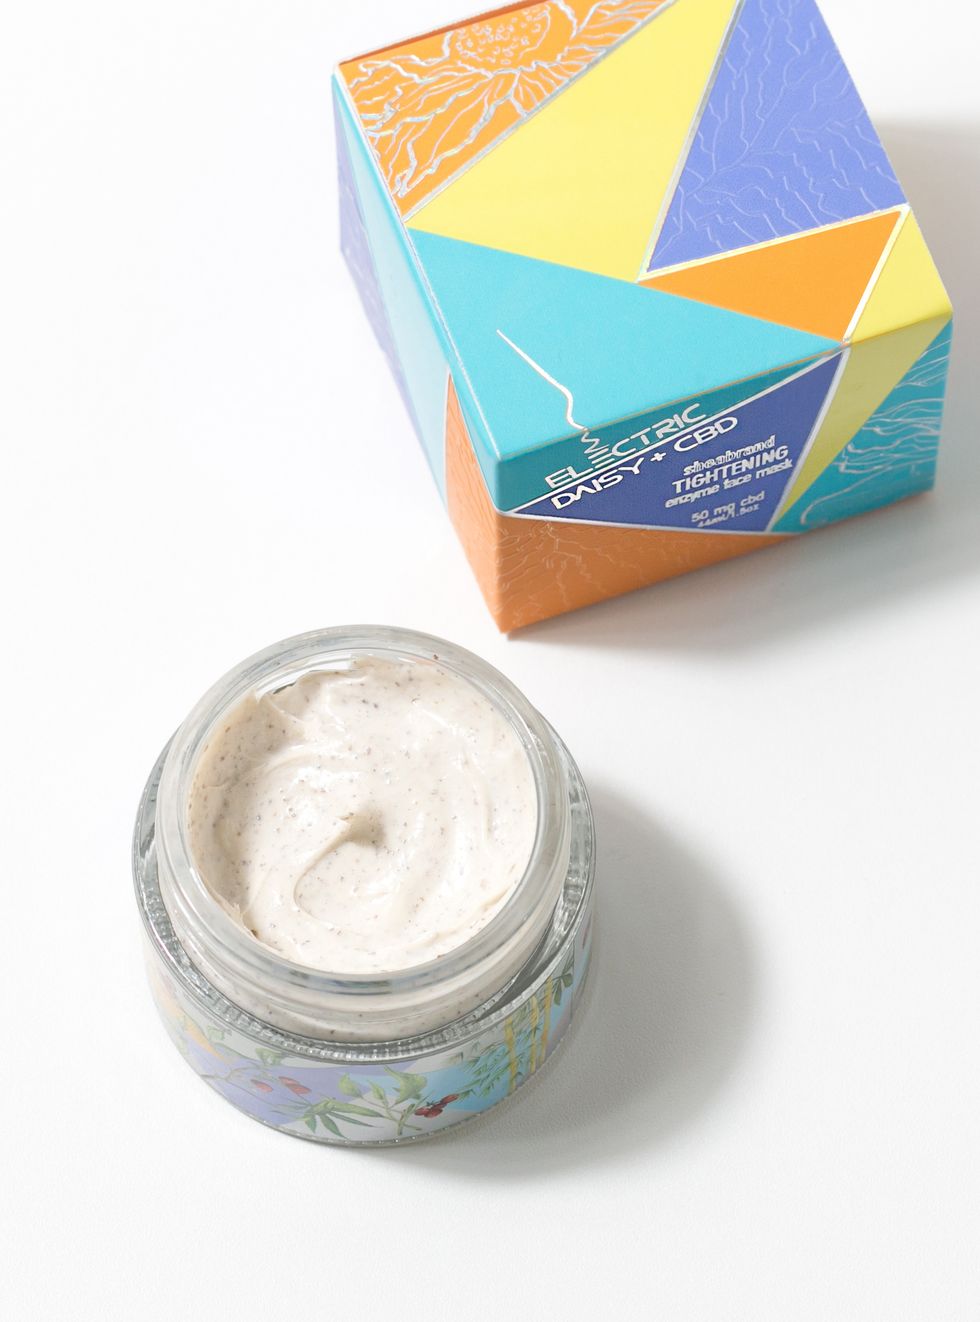 Sheabrand Electric Daisy Enzyme Face Mask